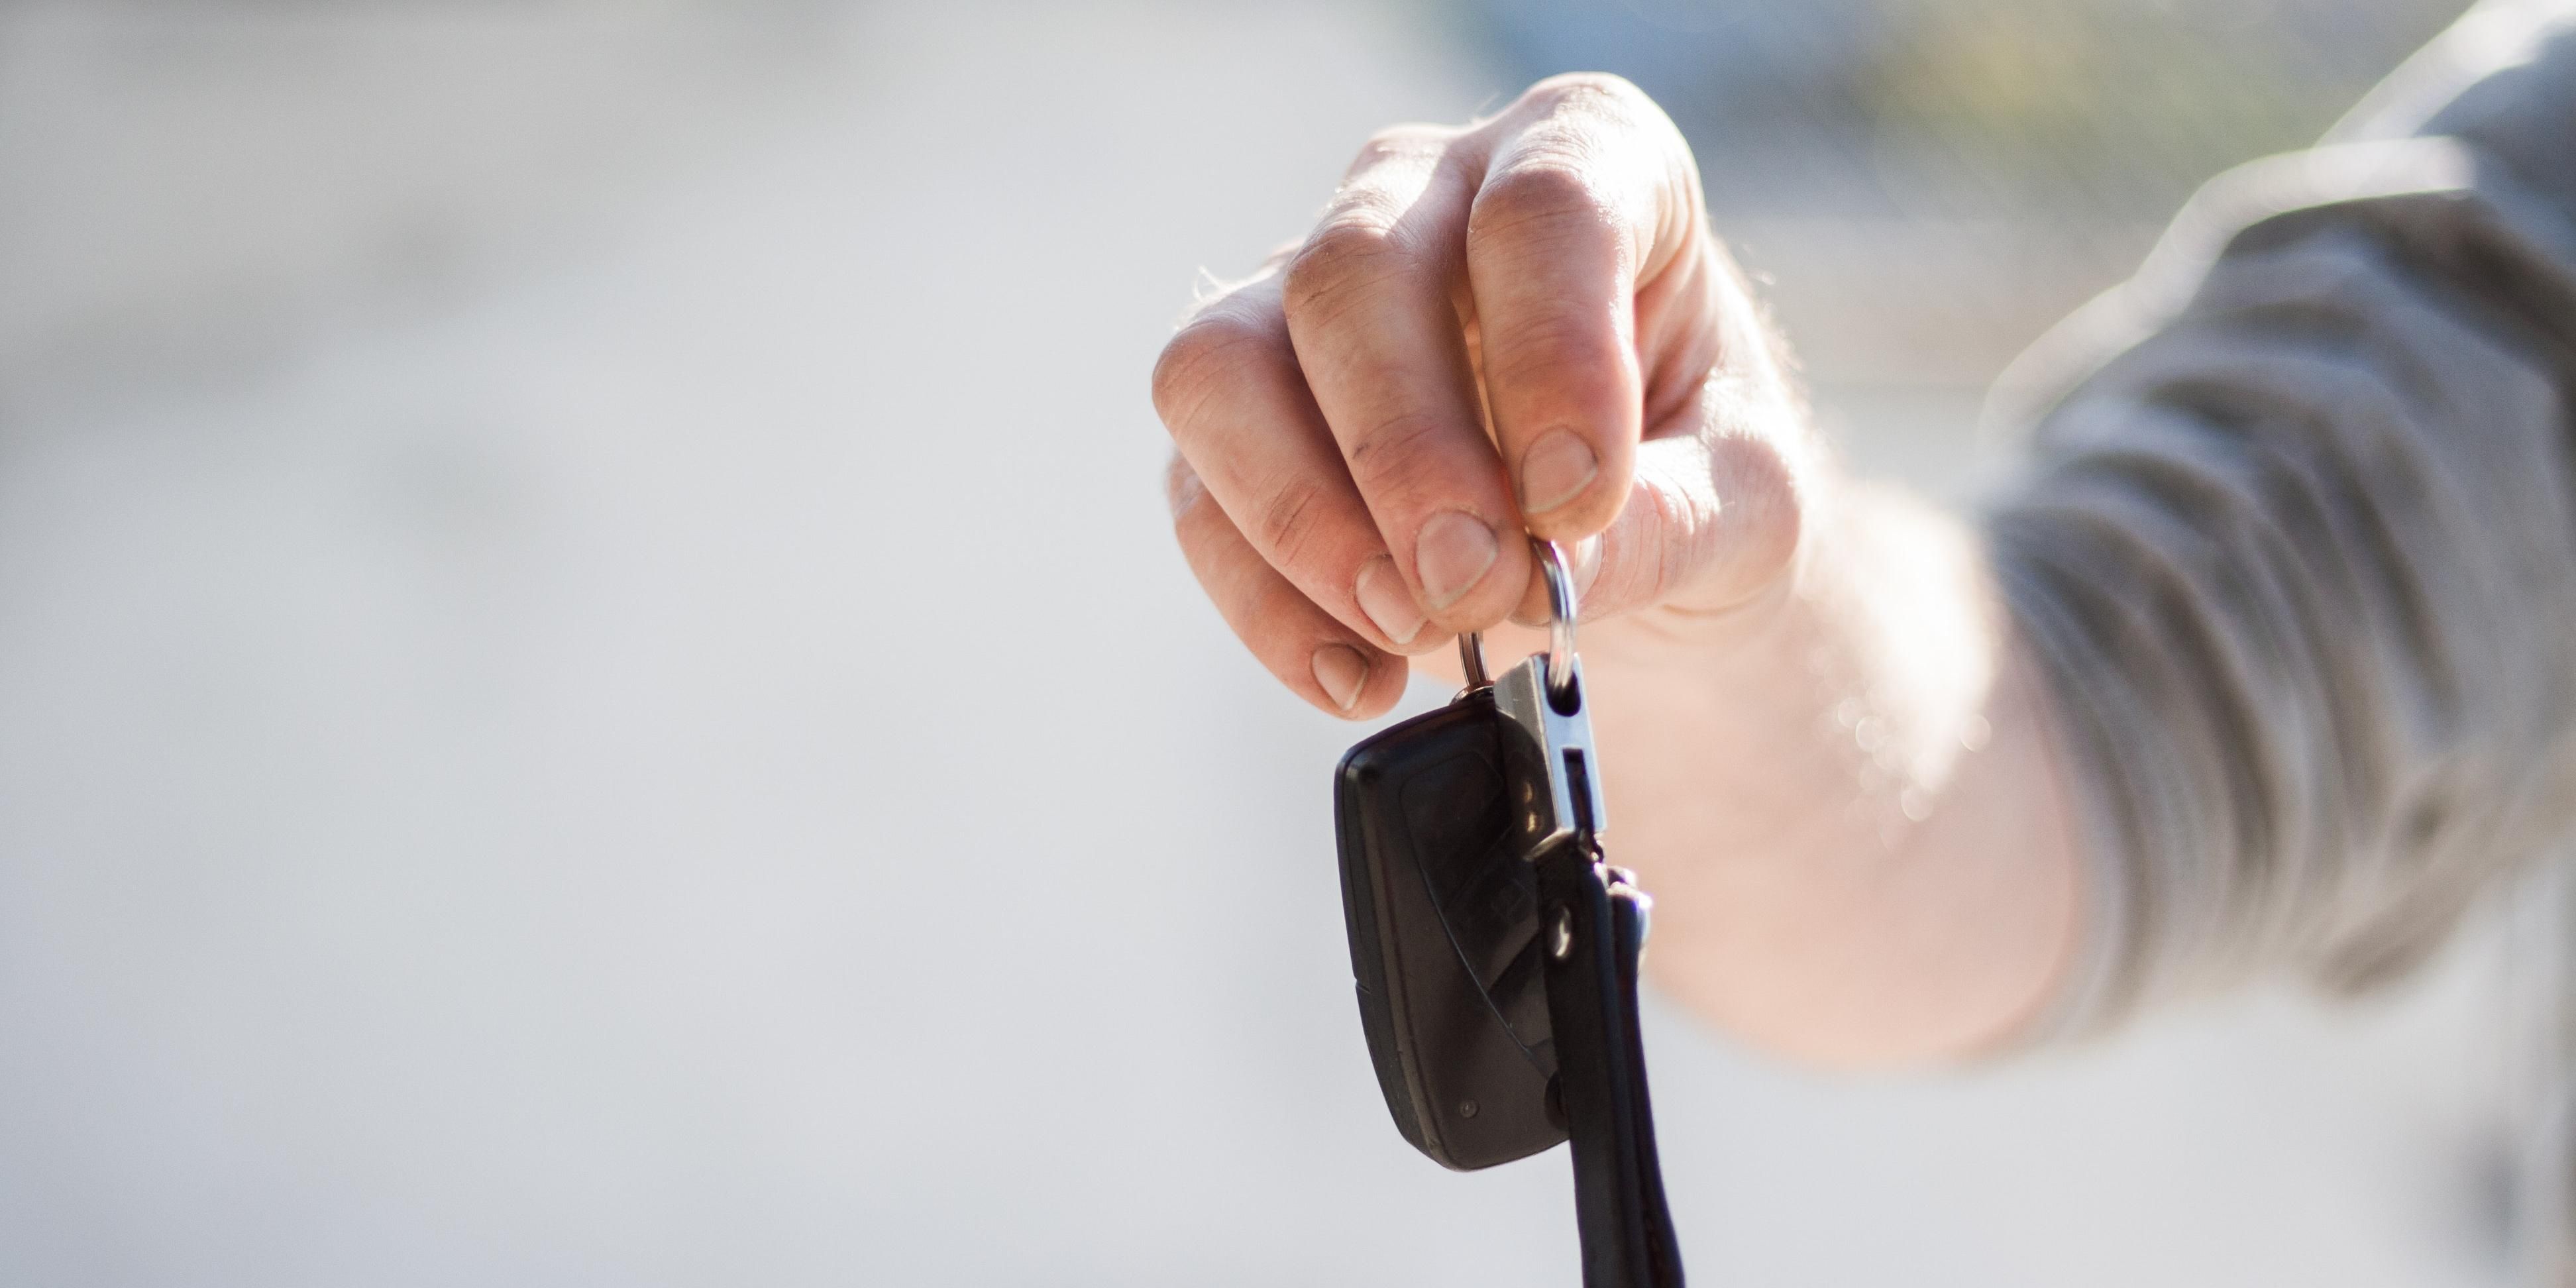 Whether you are in town for business or leisure, our free on-site parking can save you time and money while providing peace of mind knowing that your car is safe and secure.